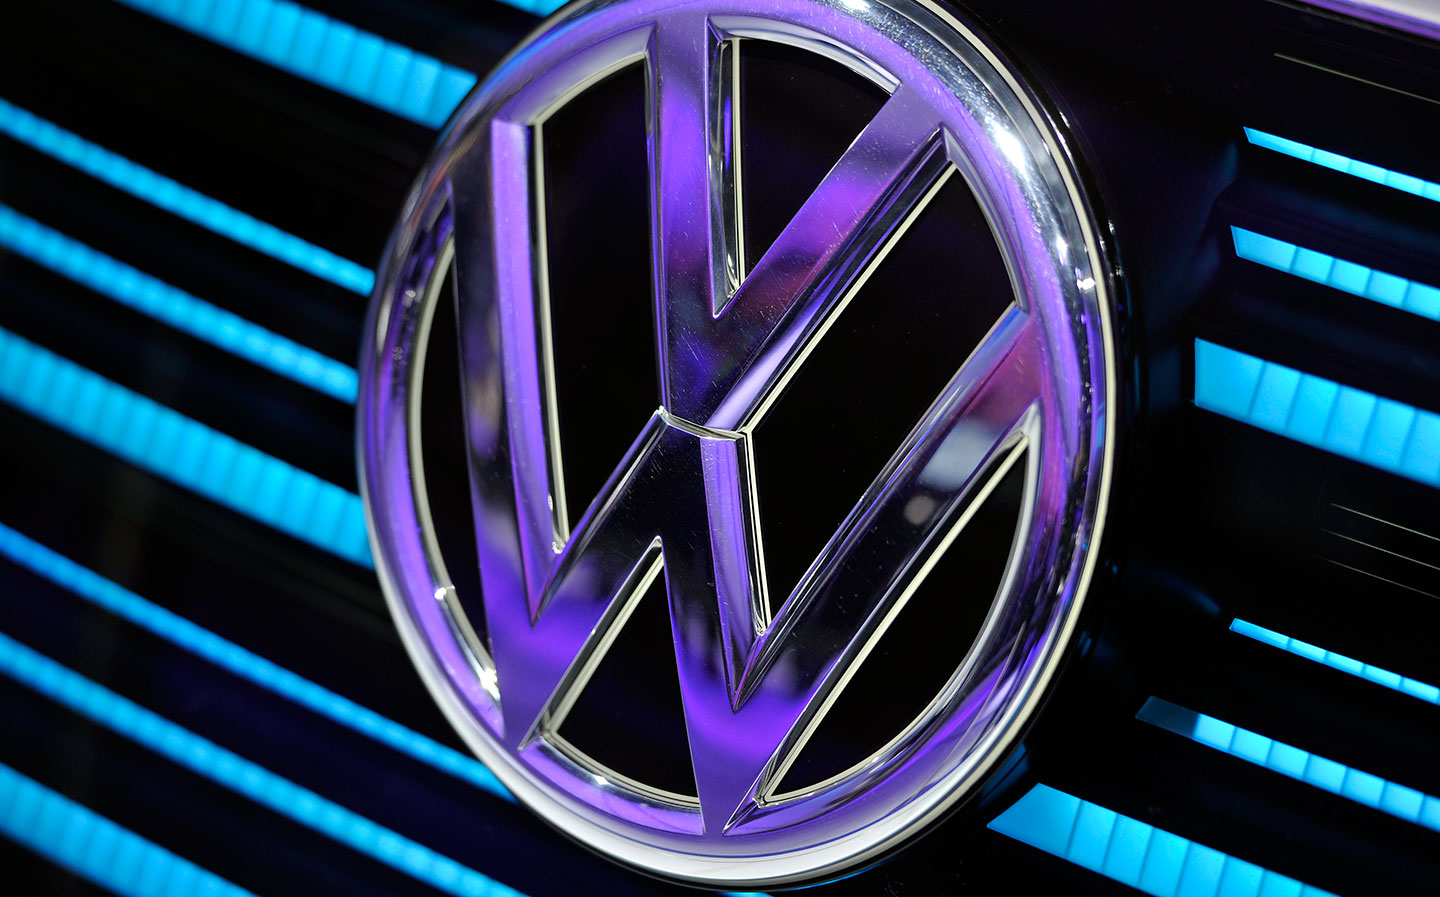 Volkswagen teams up with Hyundai and Rimac to develop new powertrain tech